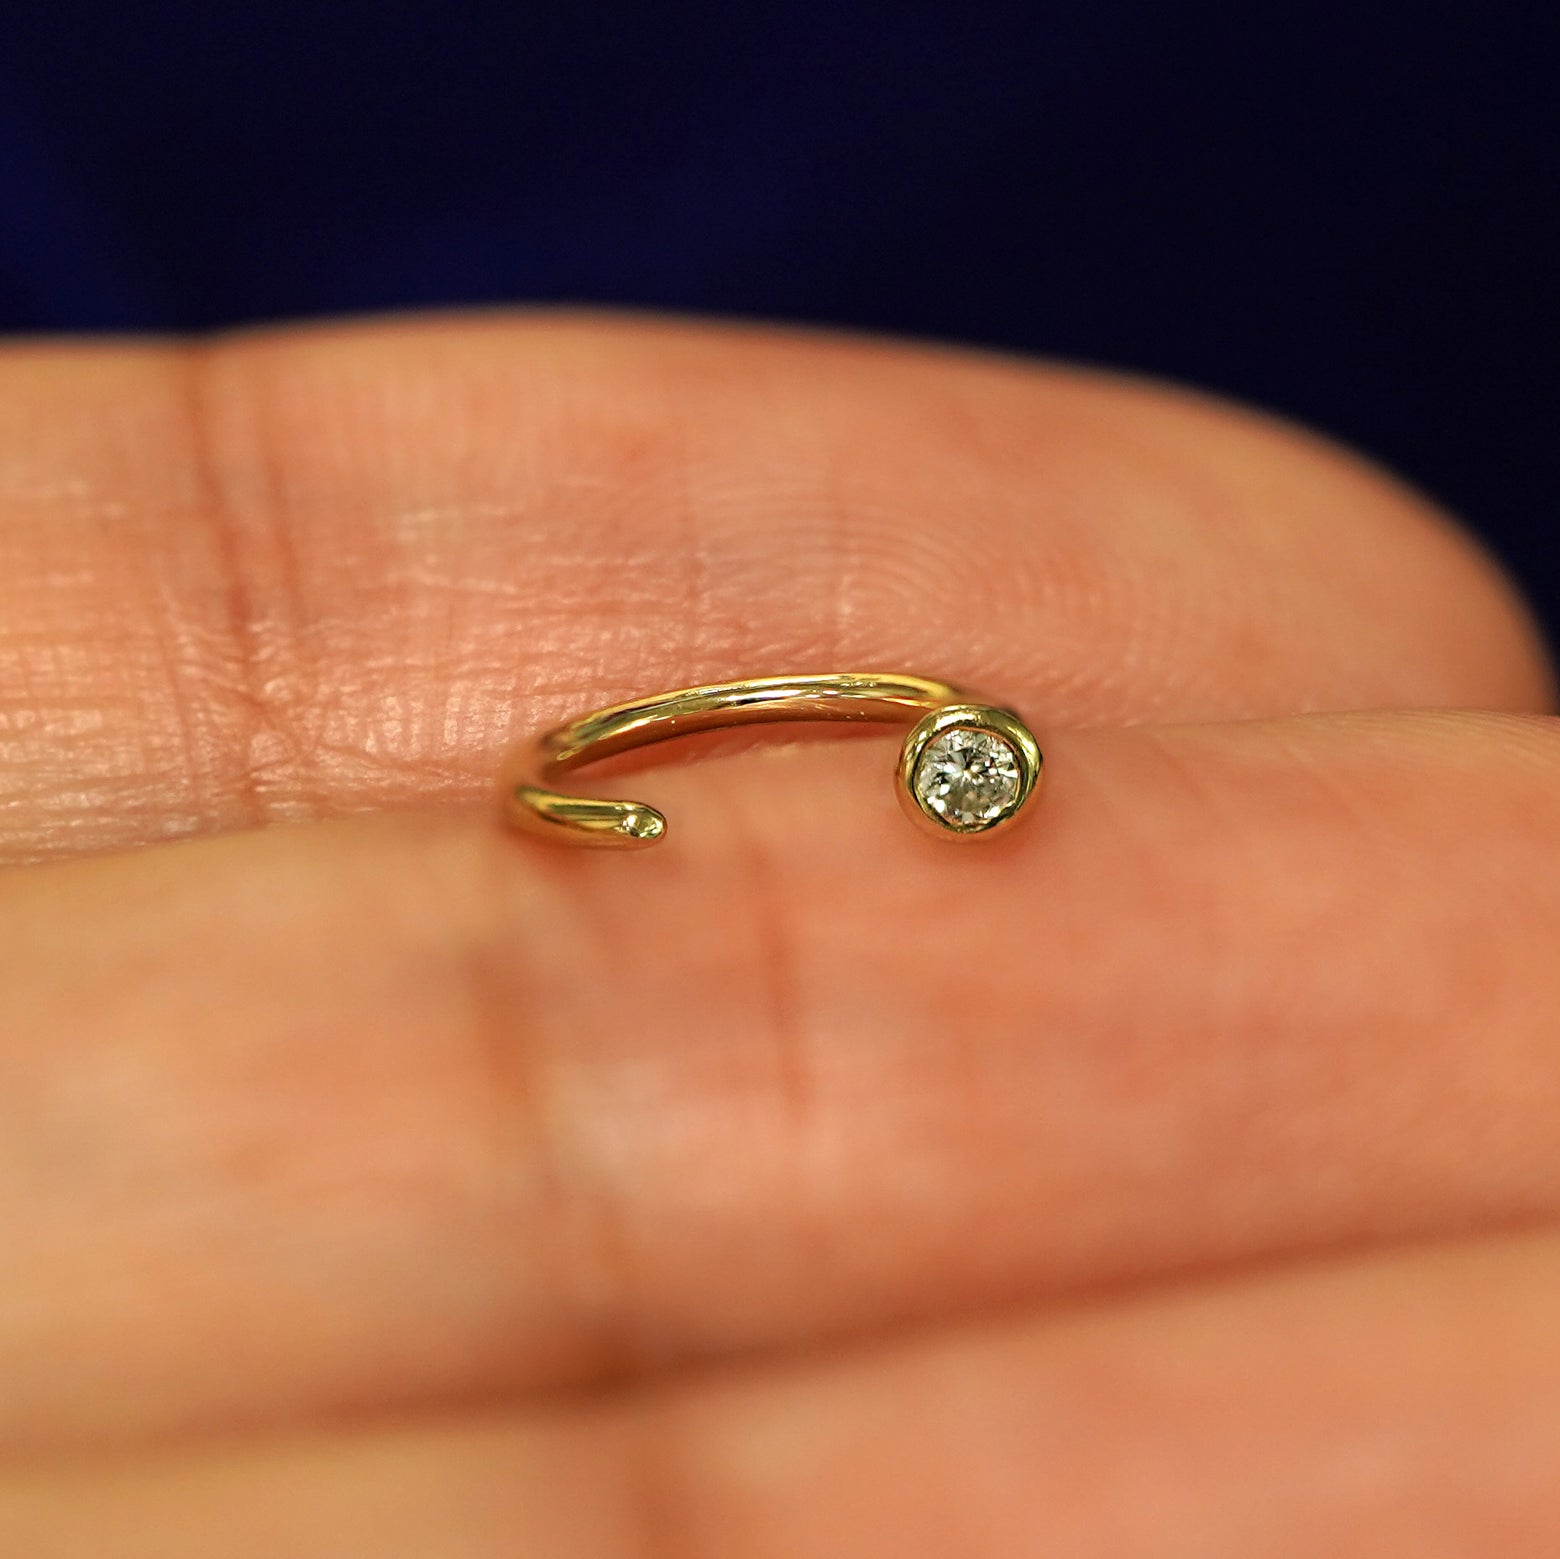 A 14k yellow gold Diamond Open Hoop resting on a models fingertip to show the open part of the earring